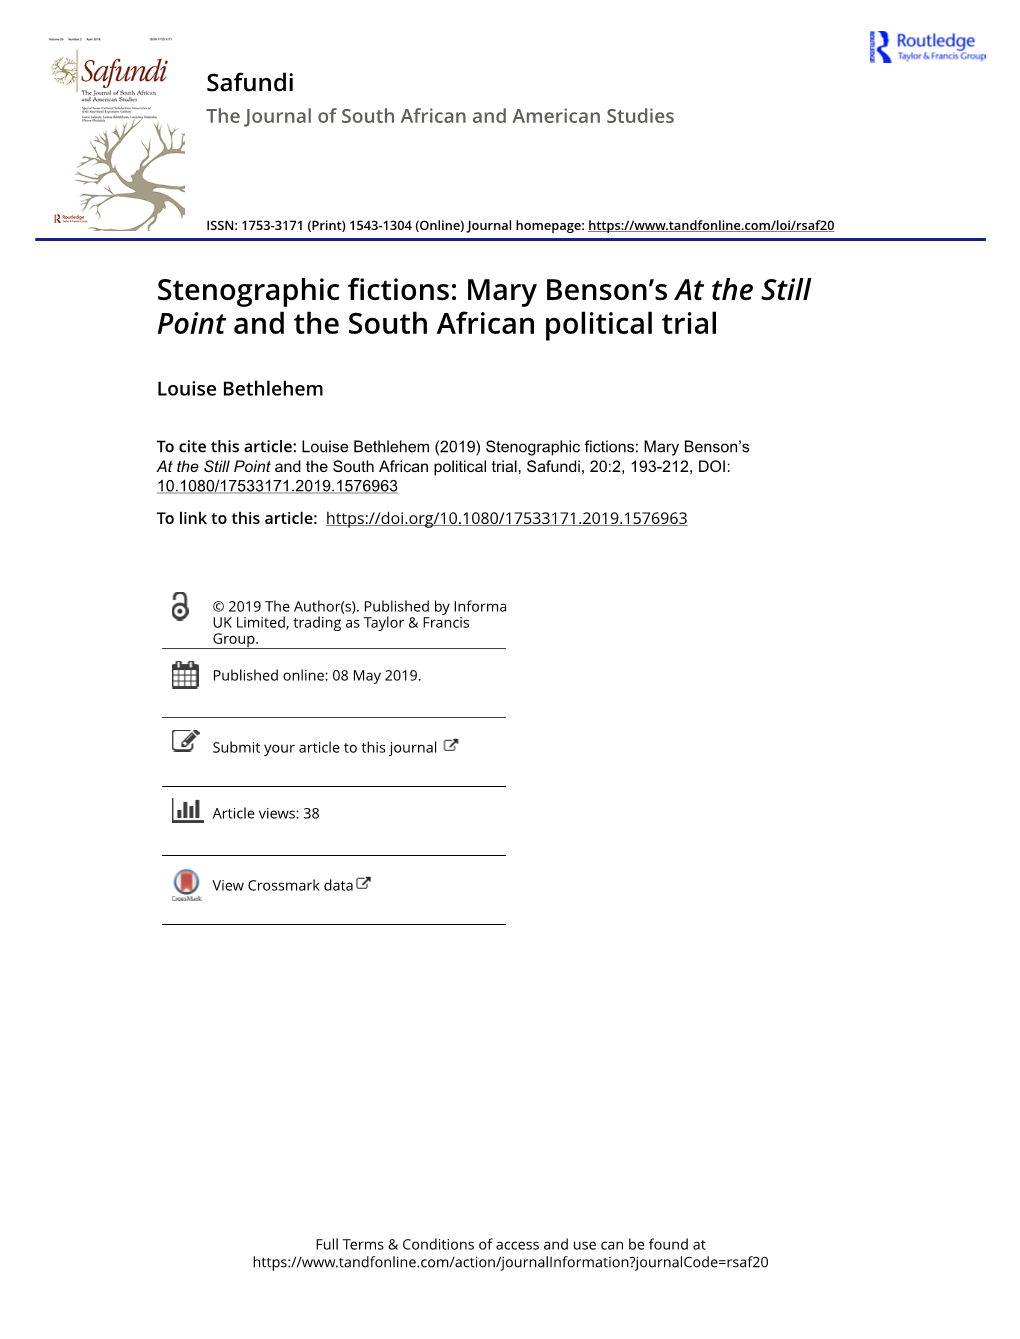 Mary Benson's at the Still Point and the South African Political Trial